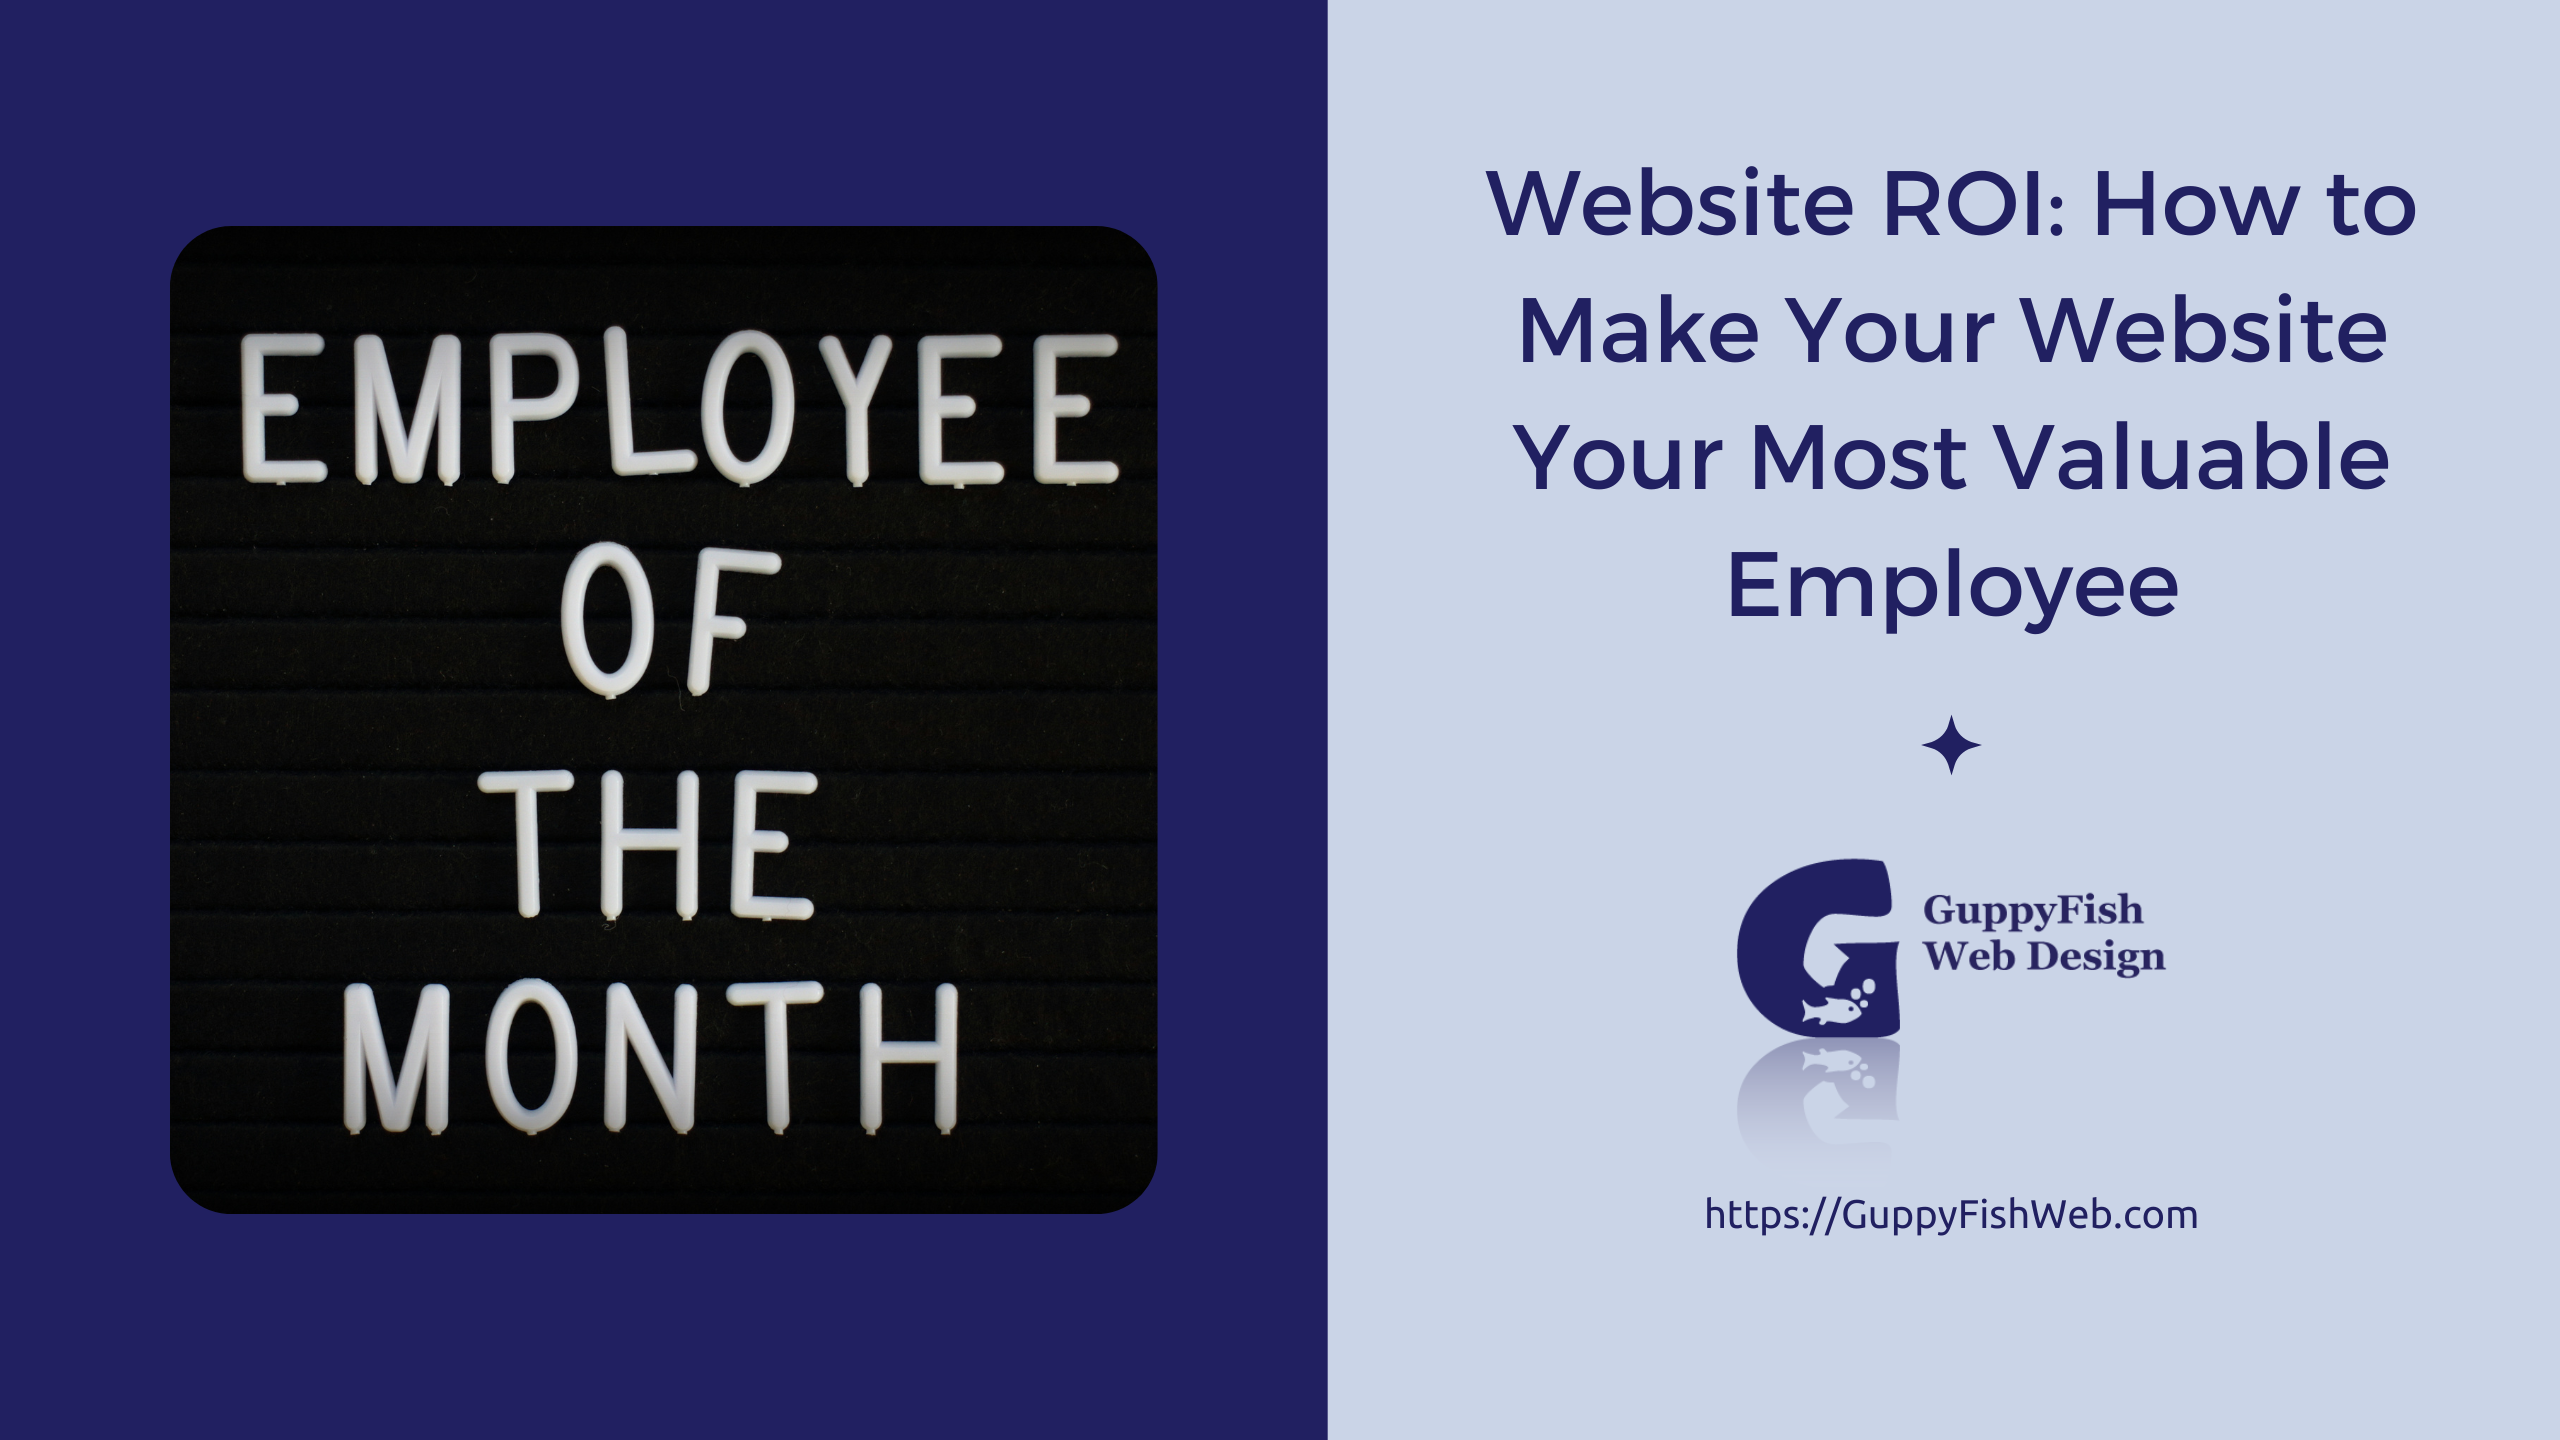 Website ROI: How to Make Your Website Your Most Valuable Employee